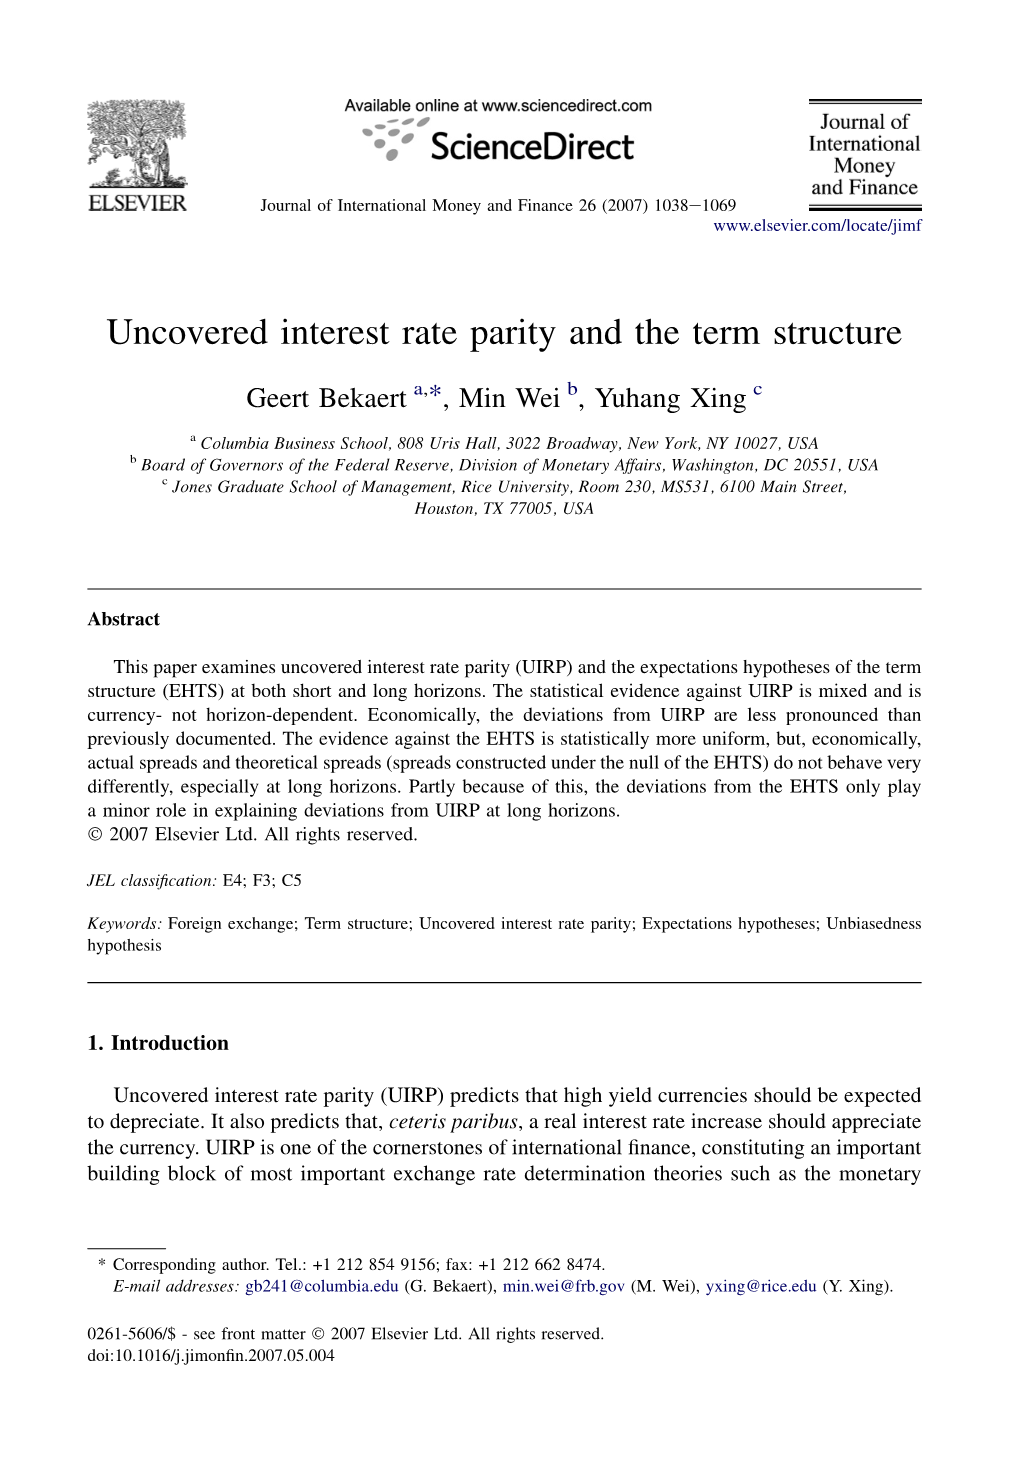 Uncovered Interest Rate Parity and the Term Structure of Interest Rates